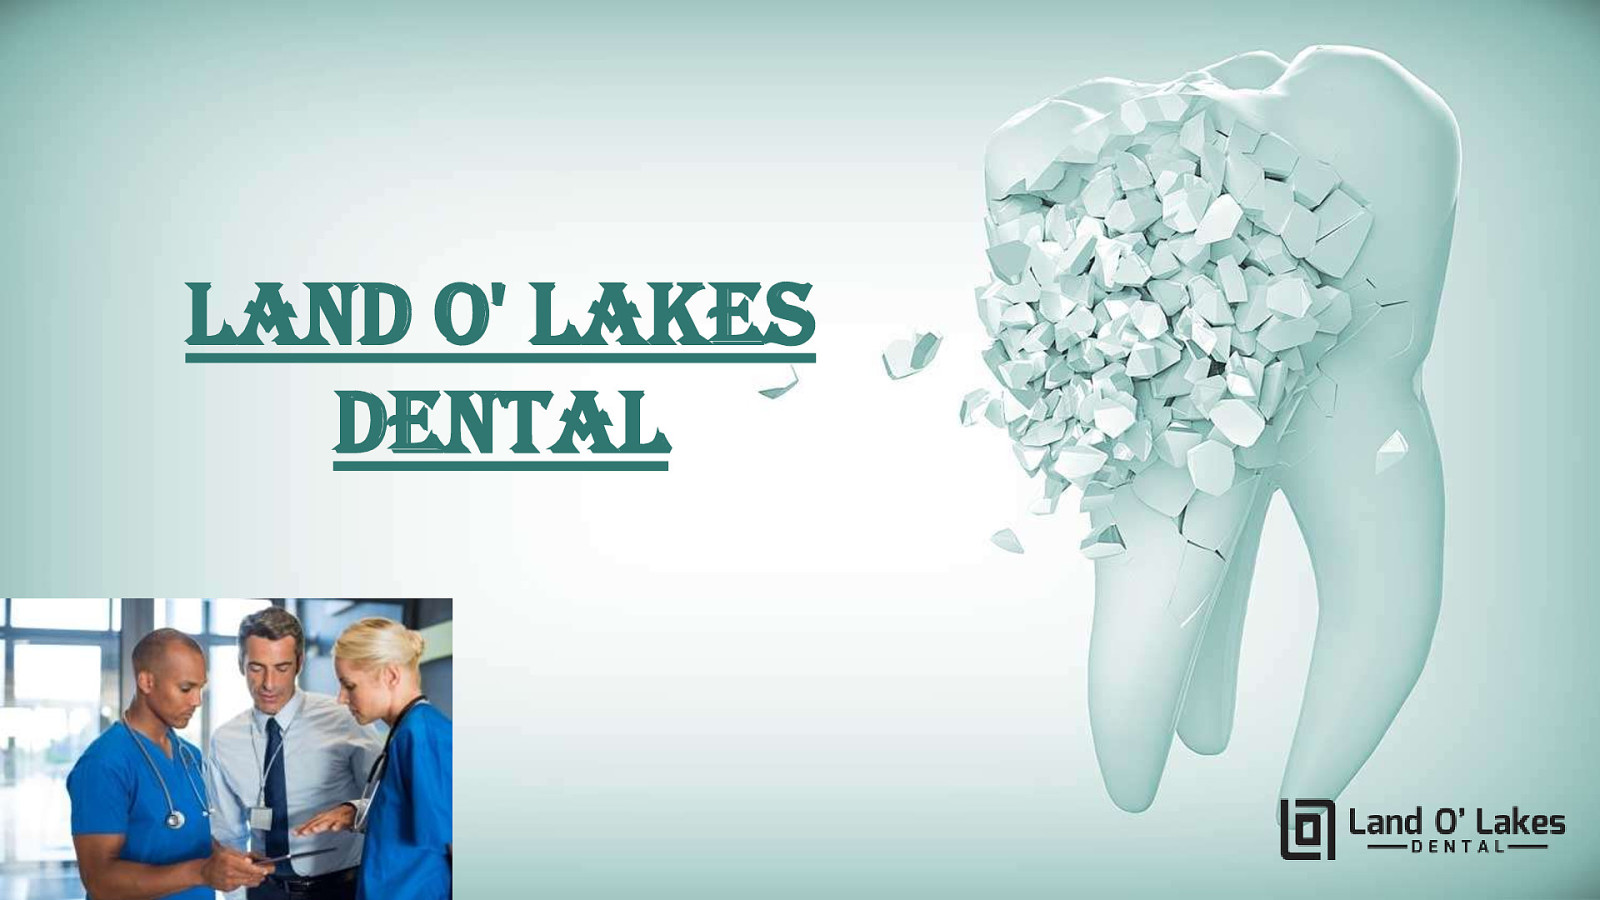 Land O’ Lakes Dental: The Most Experienced Dentist In Lethbridge